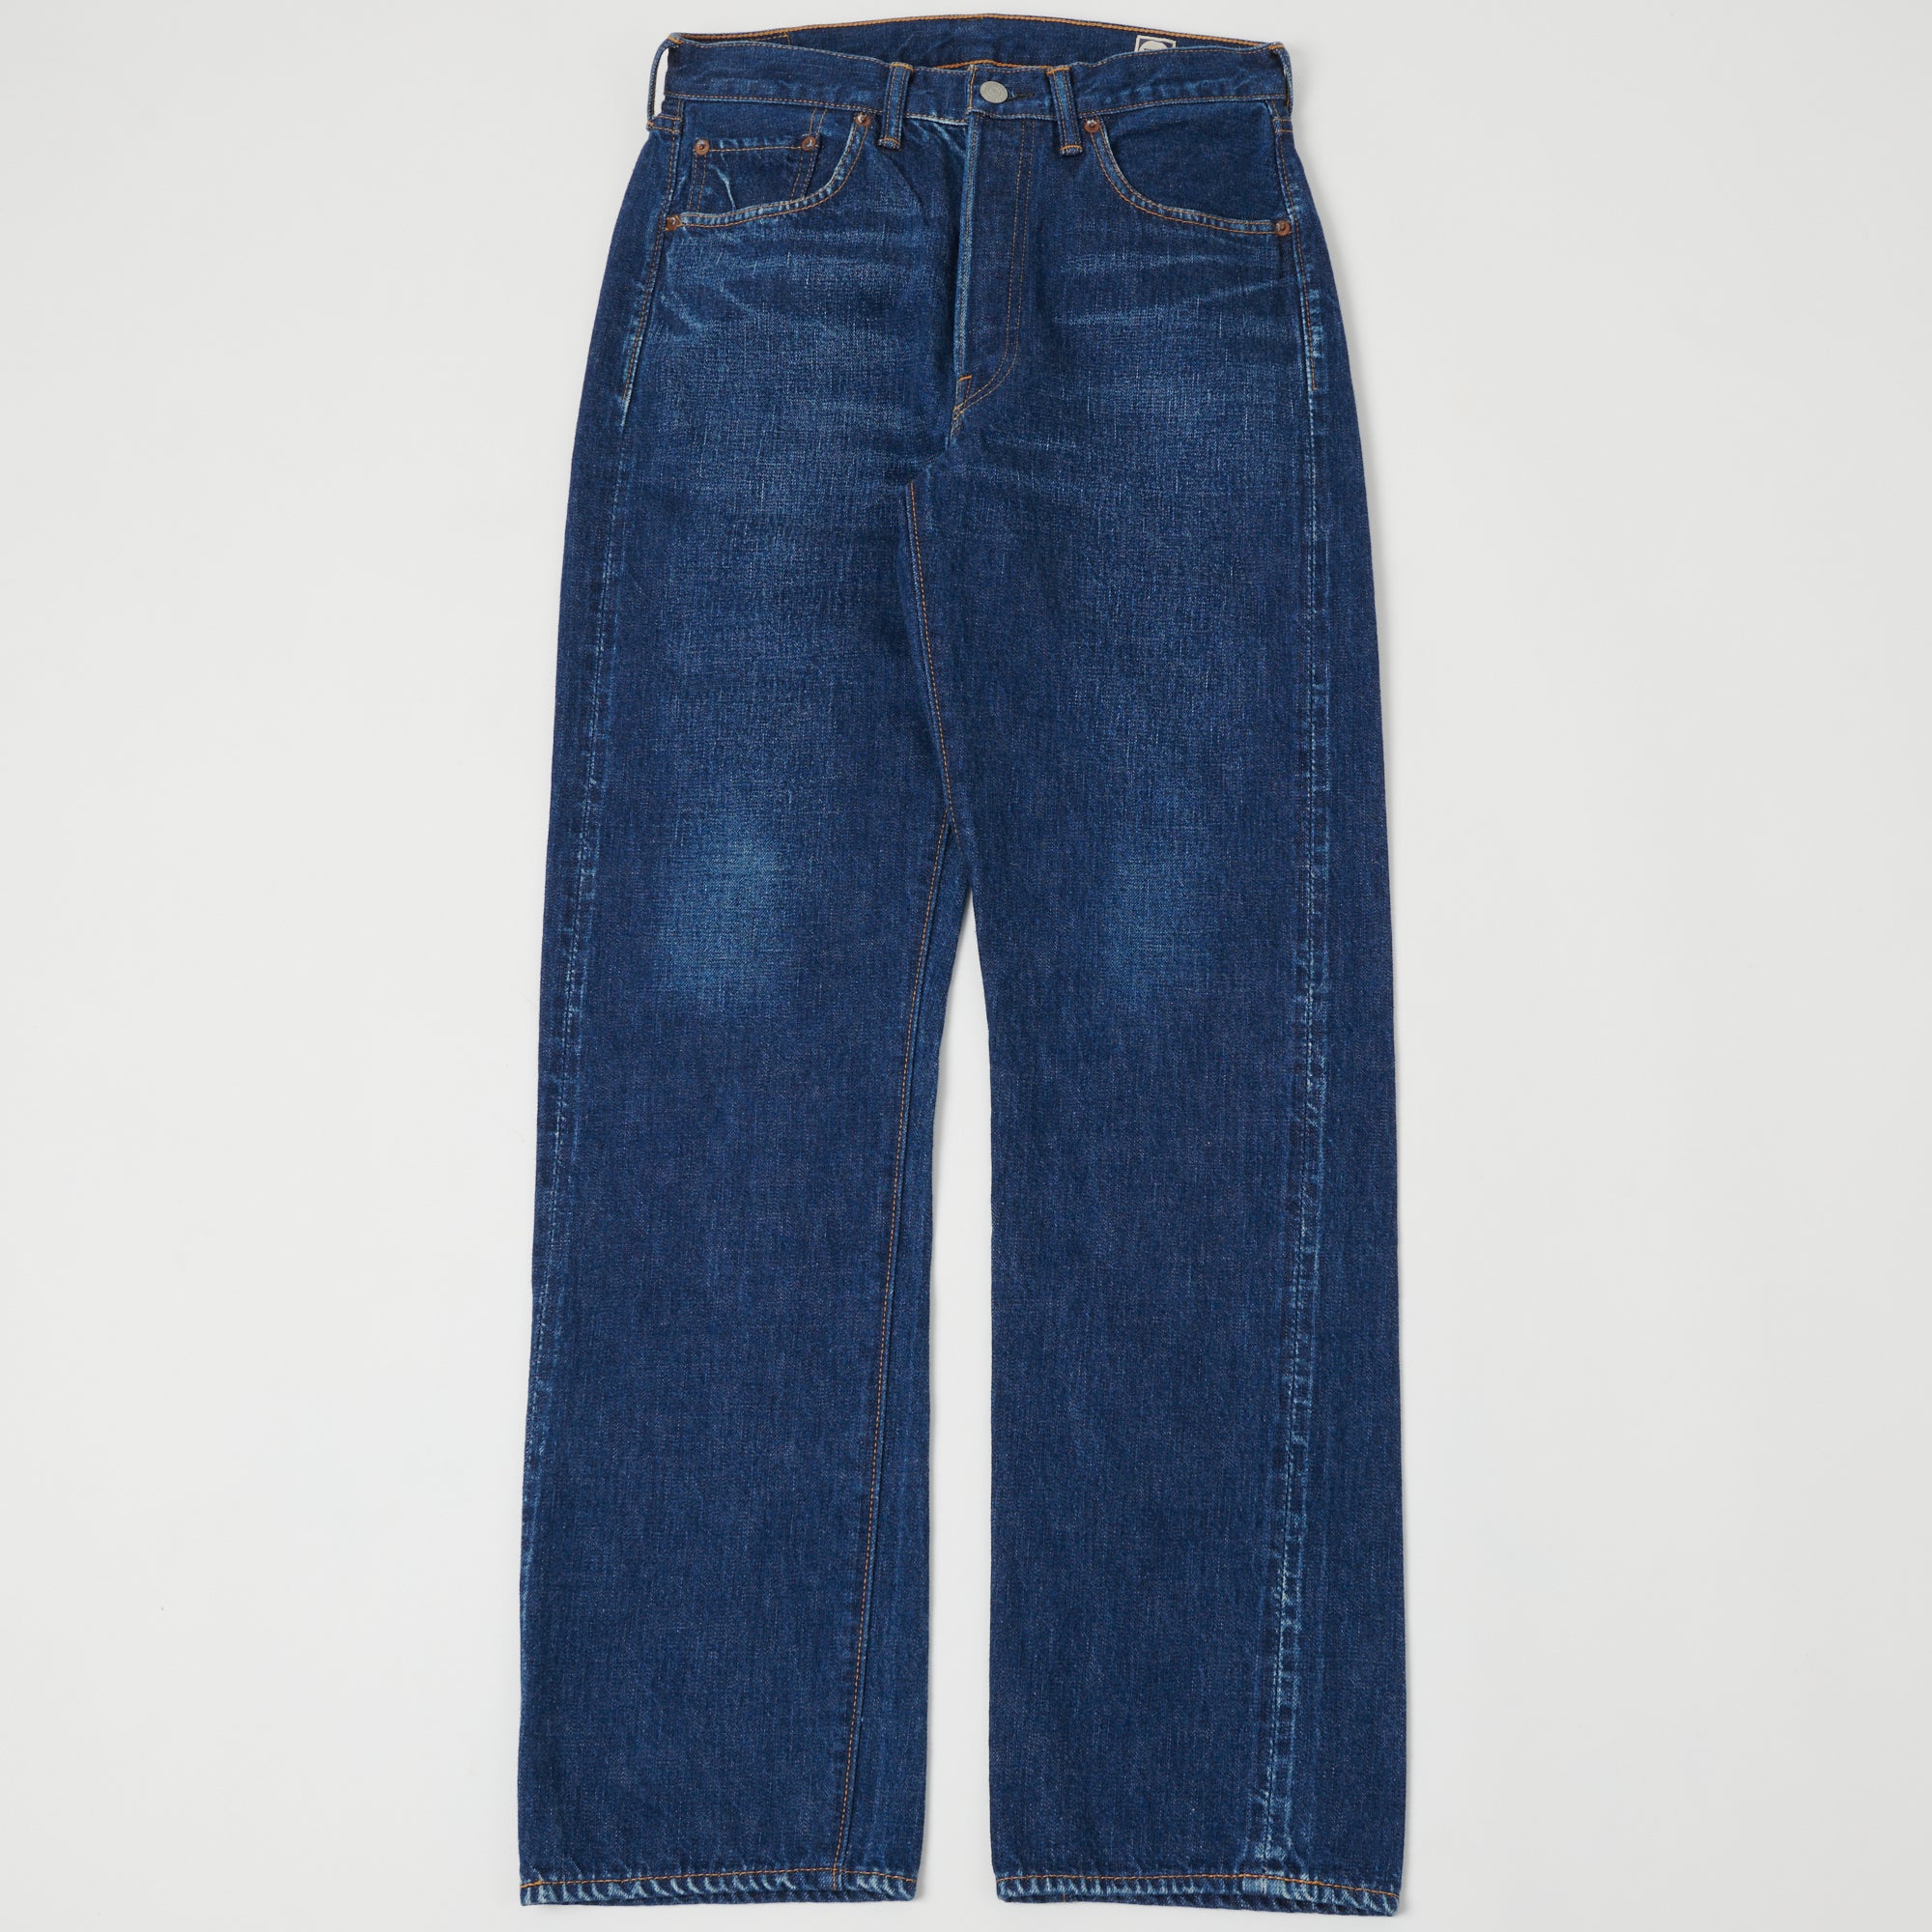 Full Count 1102 13.7oz 'That Thing' Regular Straight Jean - One Wash ...